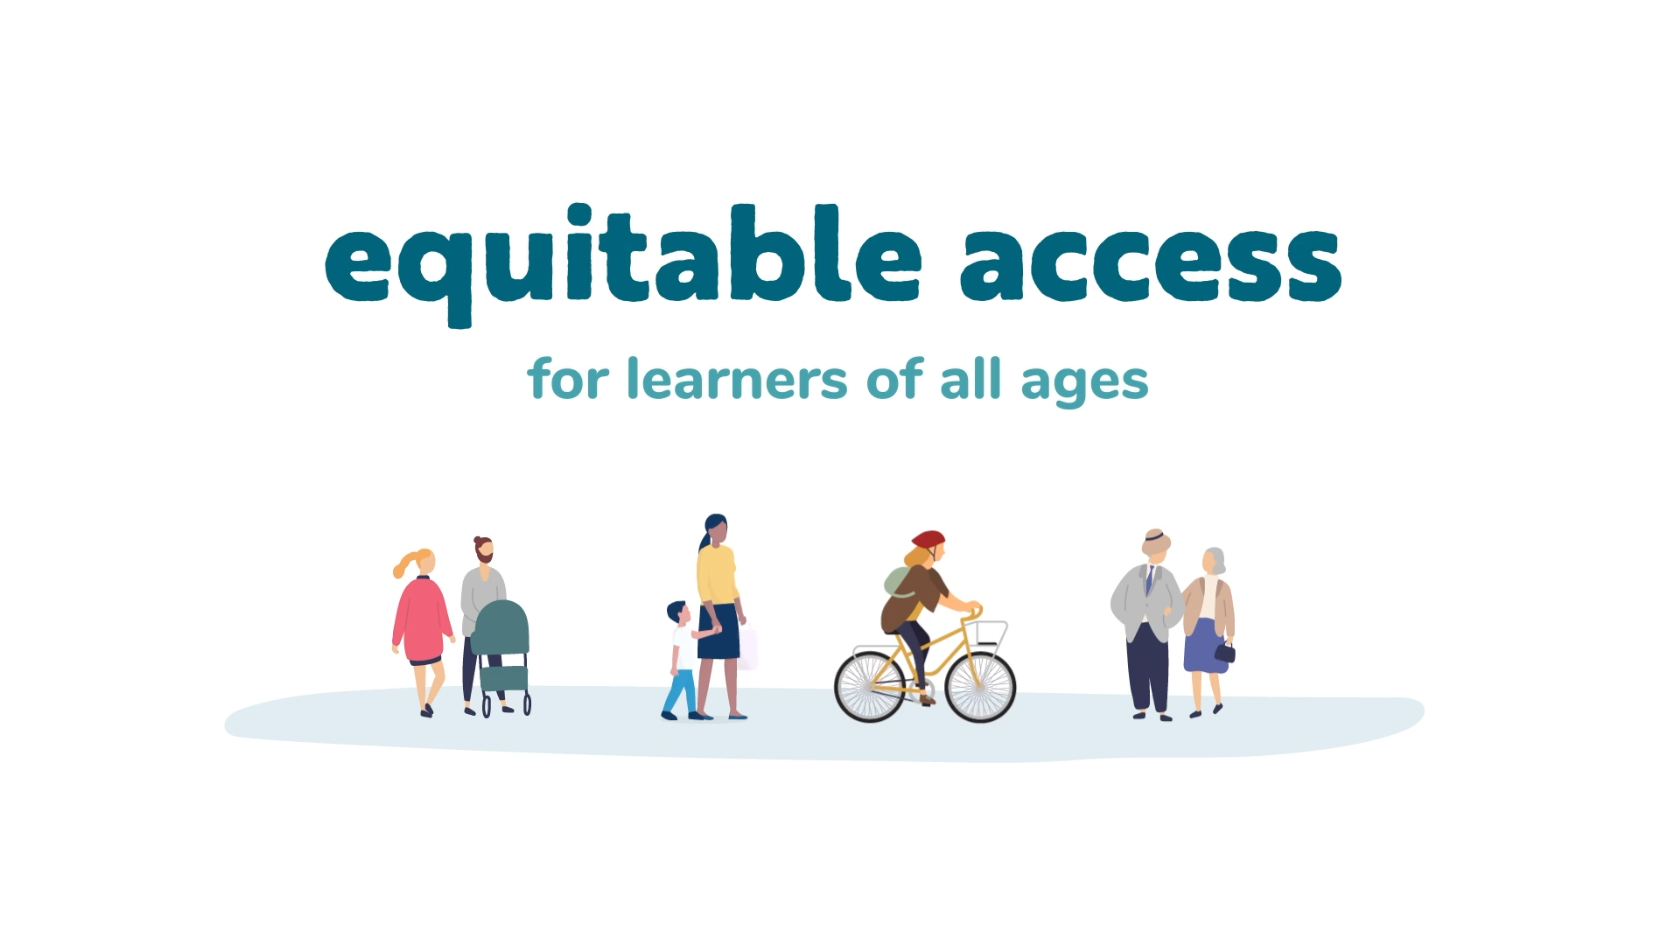 STEM Learning Ecosystems introductory video screenshot showing equitable access for learners of all ages